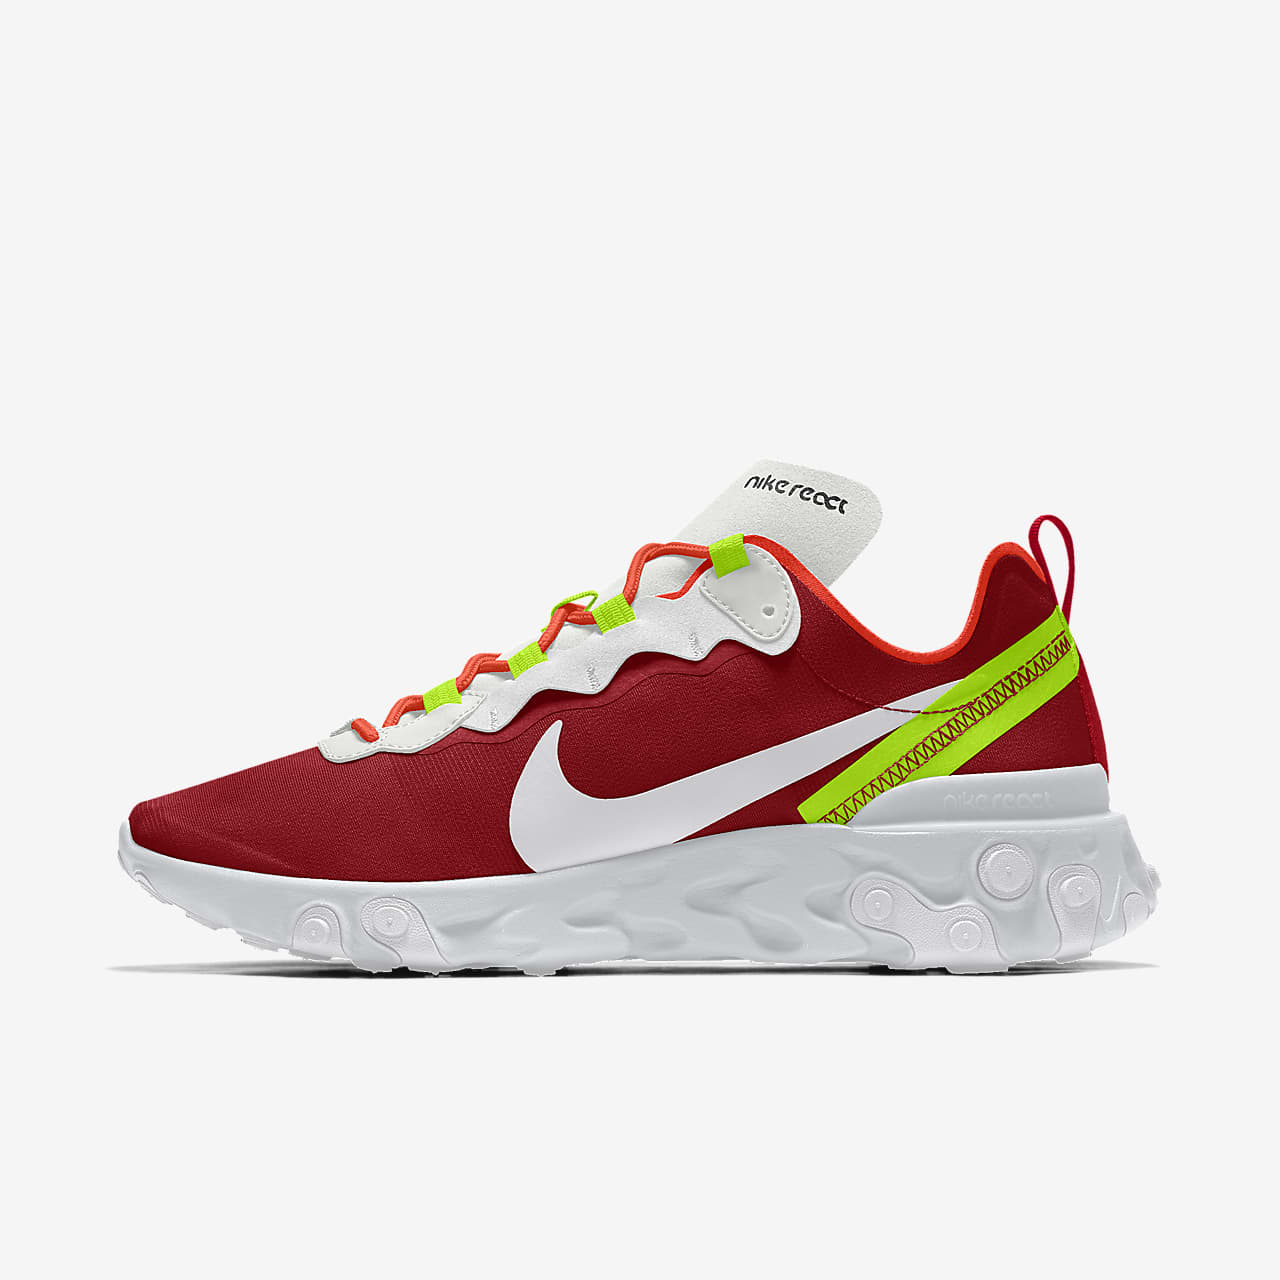 Chaussure lifestyle personnalisable Nike React Element 55 By You pour Femme